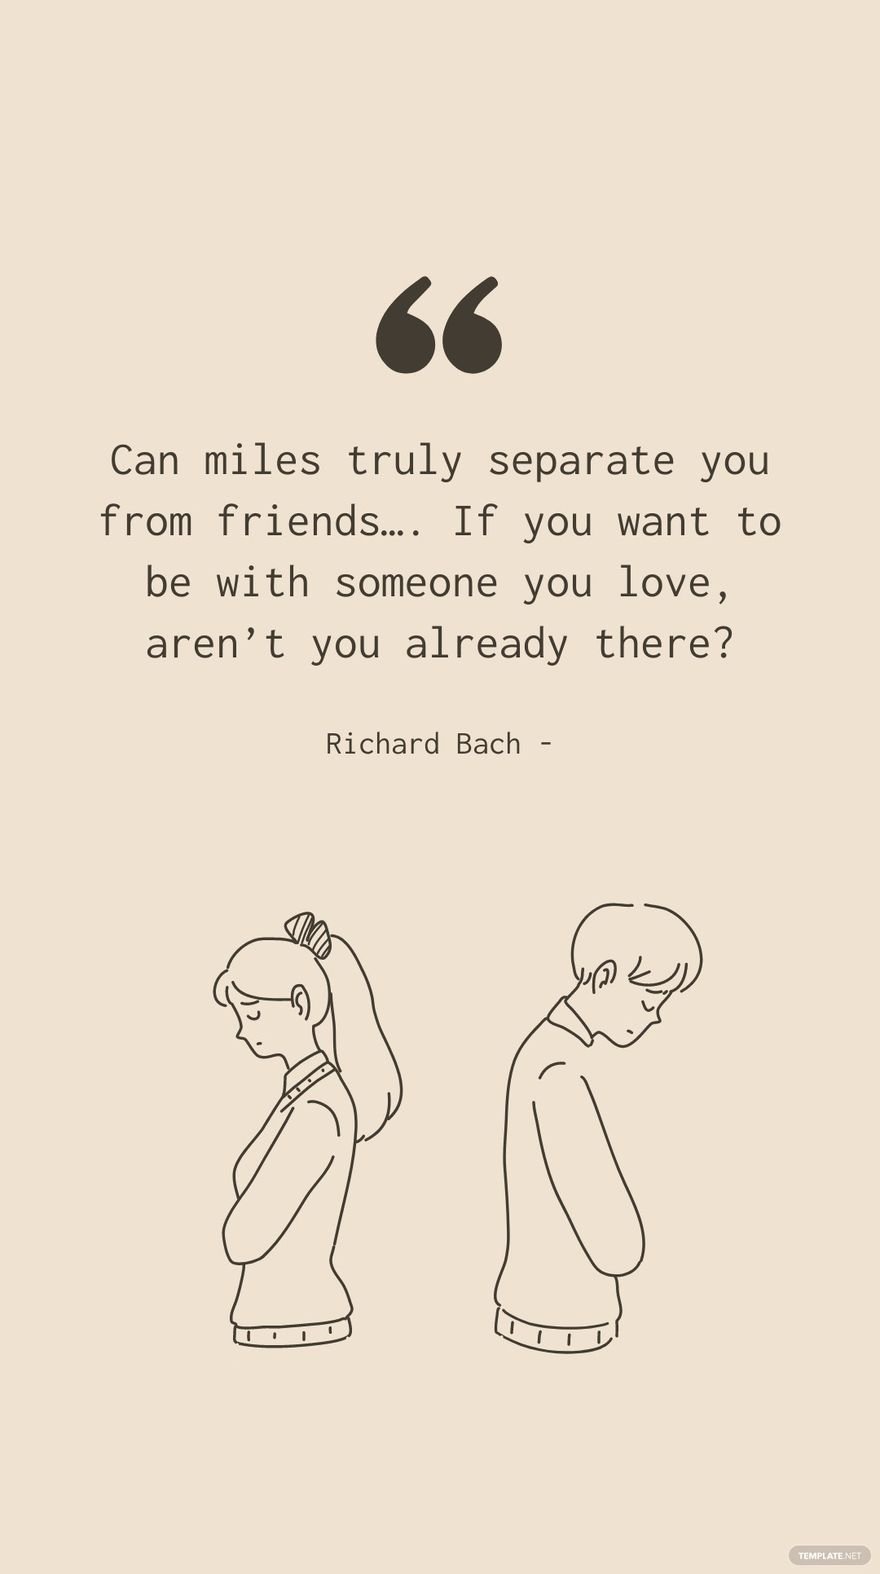 Richard Bach - Can miles truly separate you from friends…. If you want to be with someone you love, aren’t you already there?